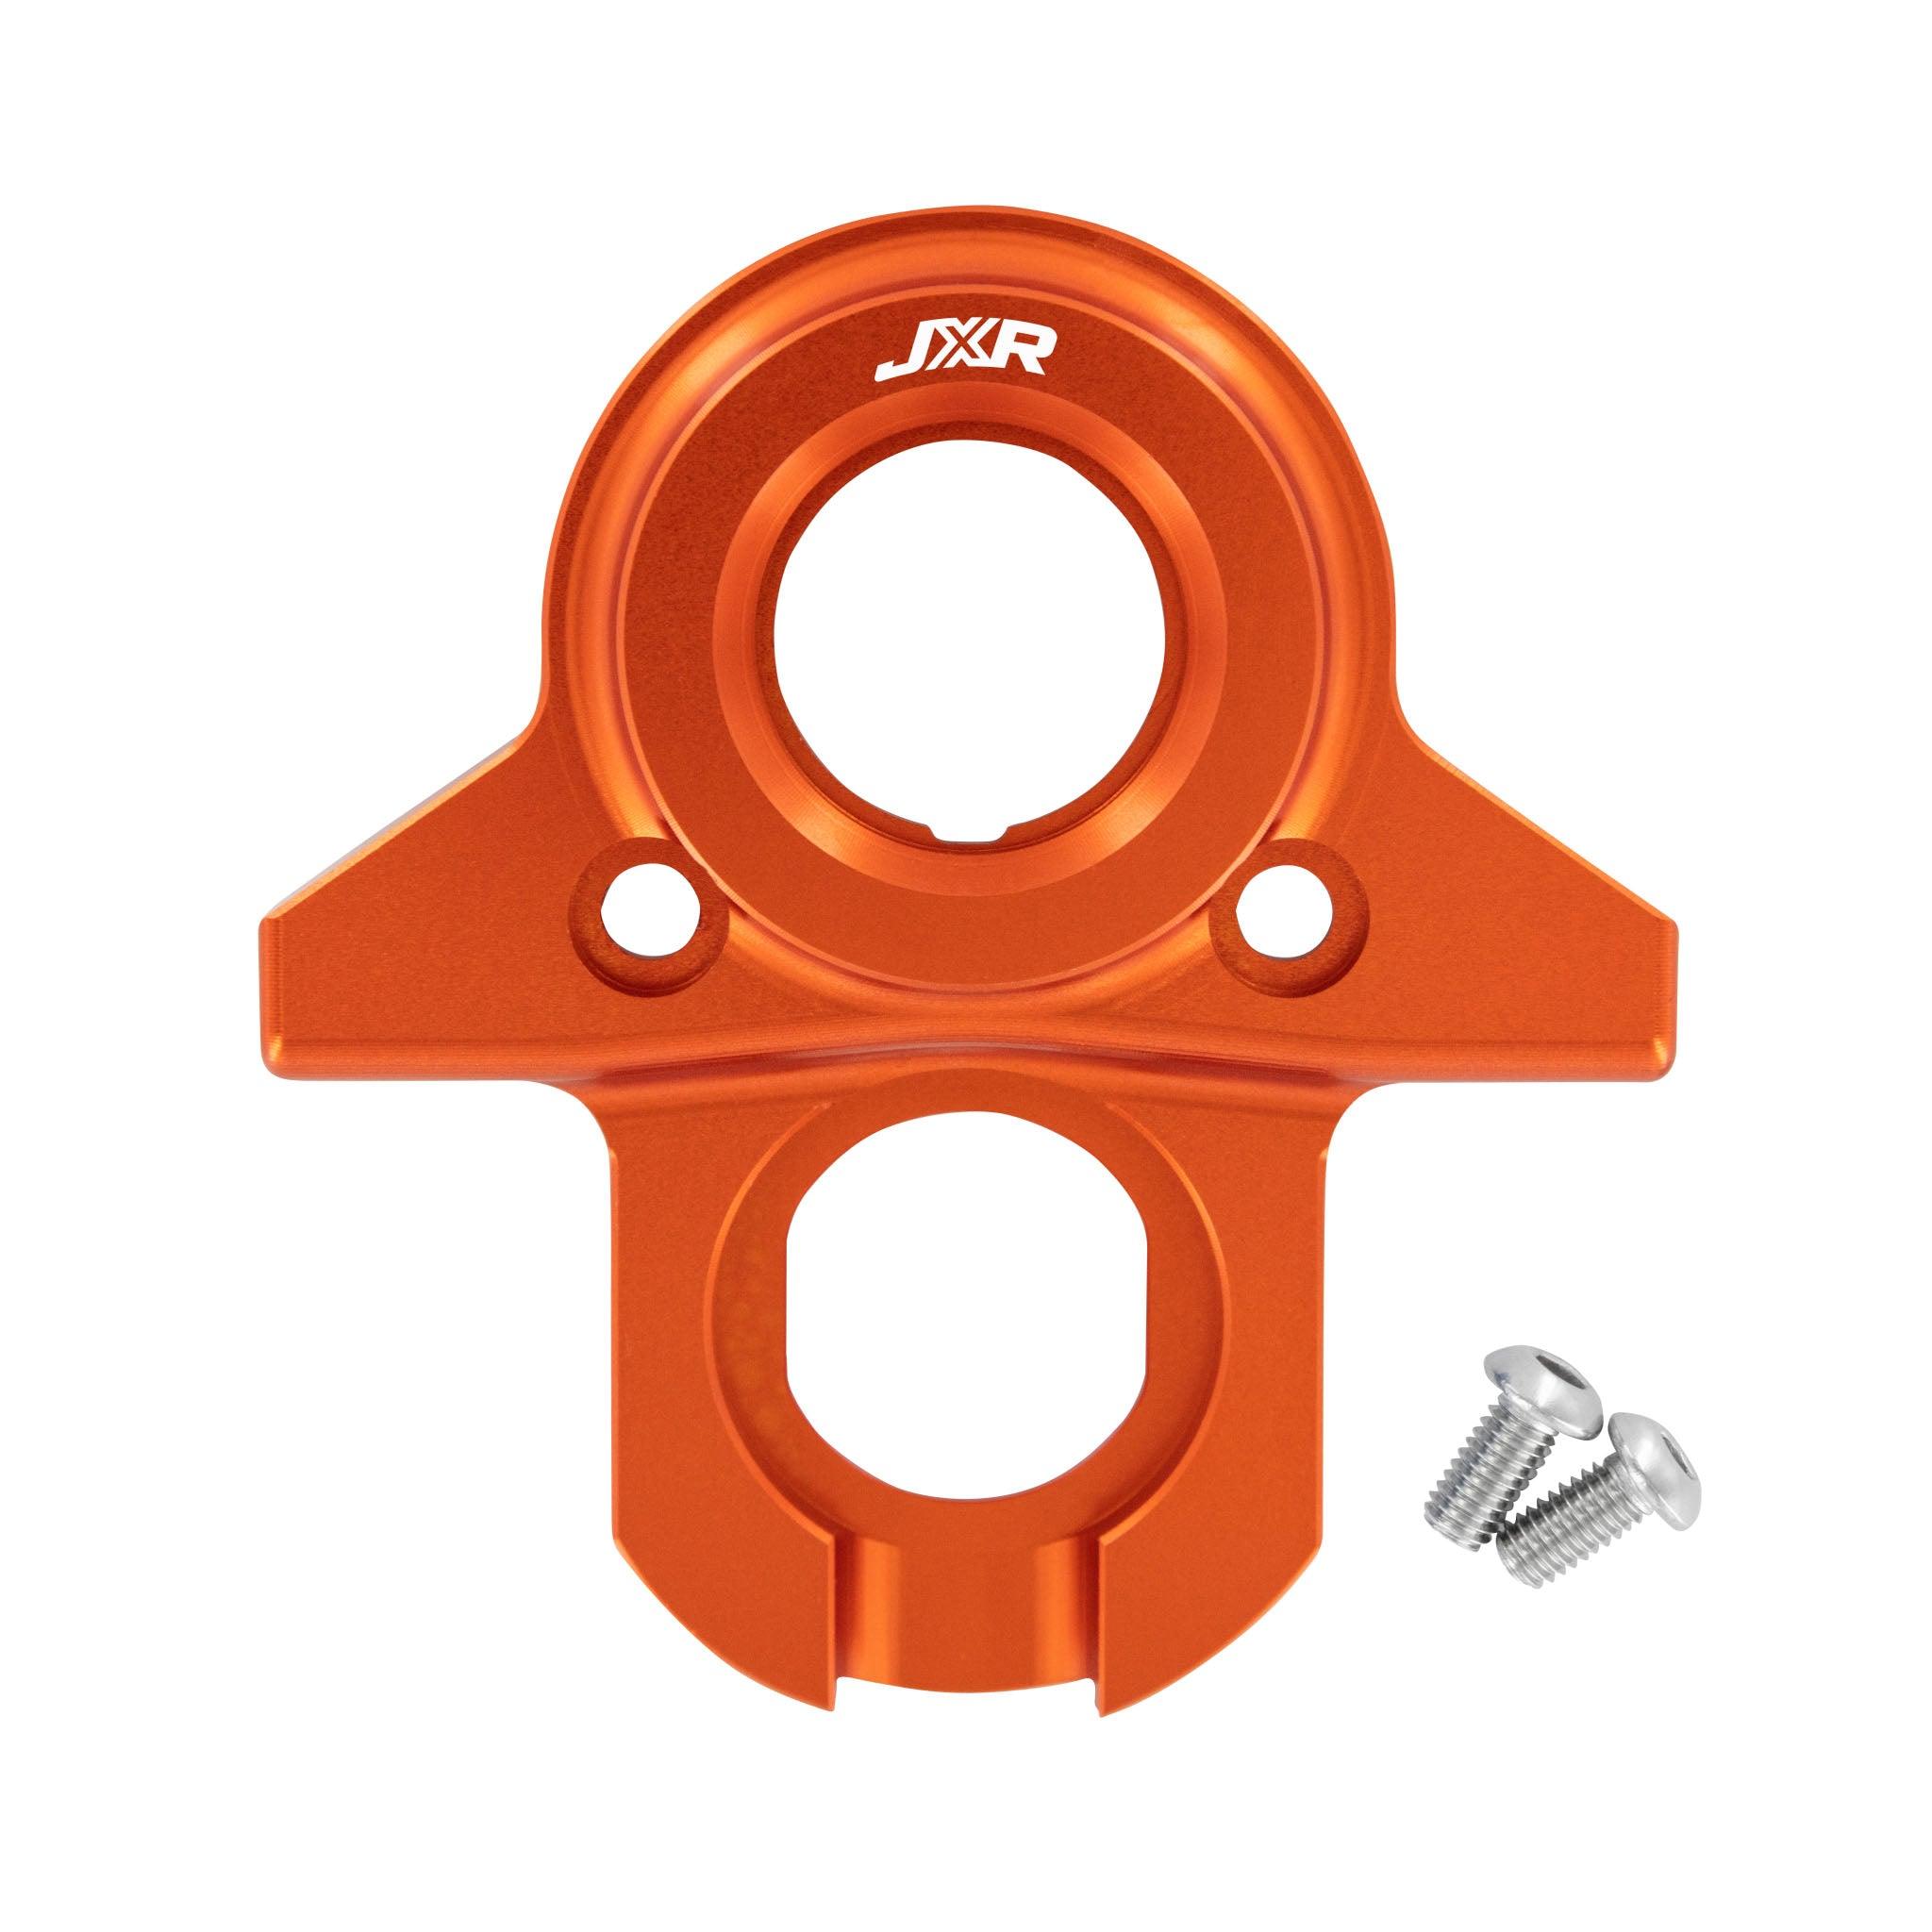 Orange key Ignition cover for Surron Light Bee